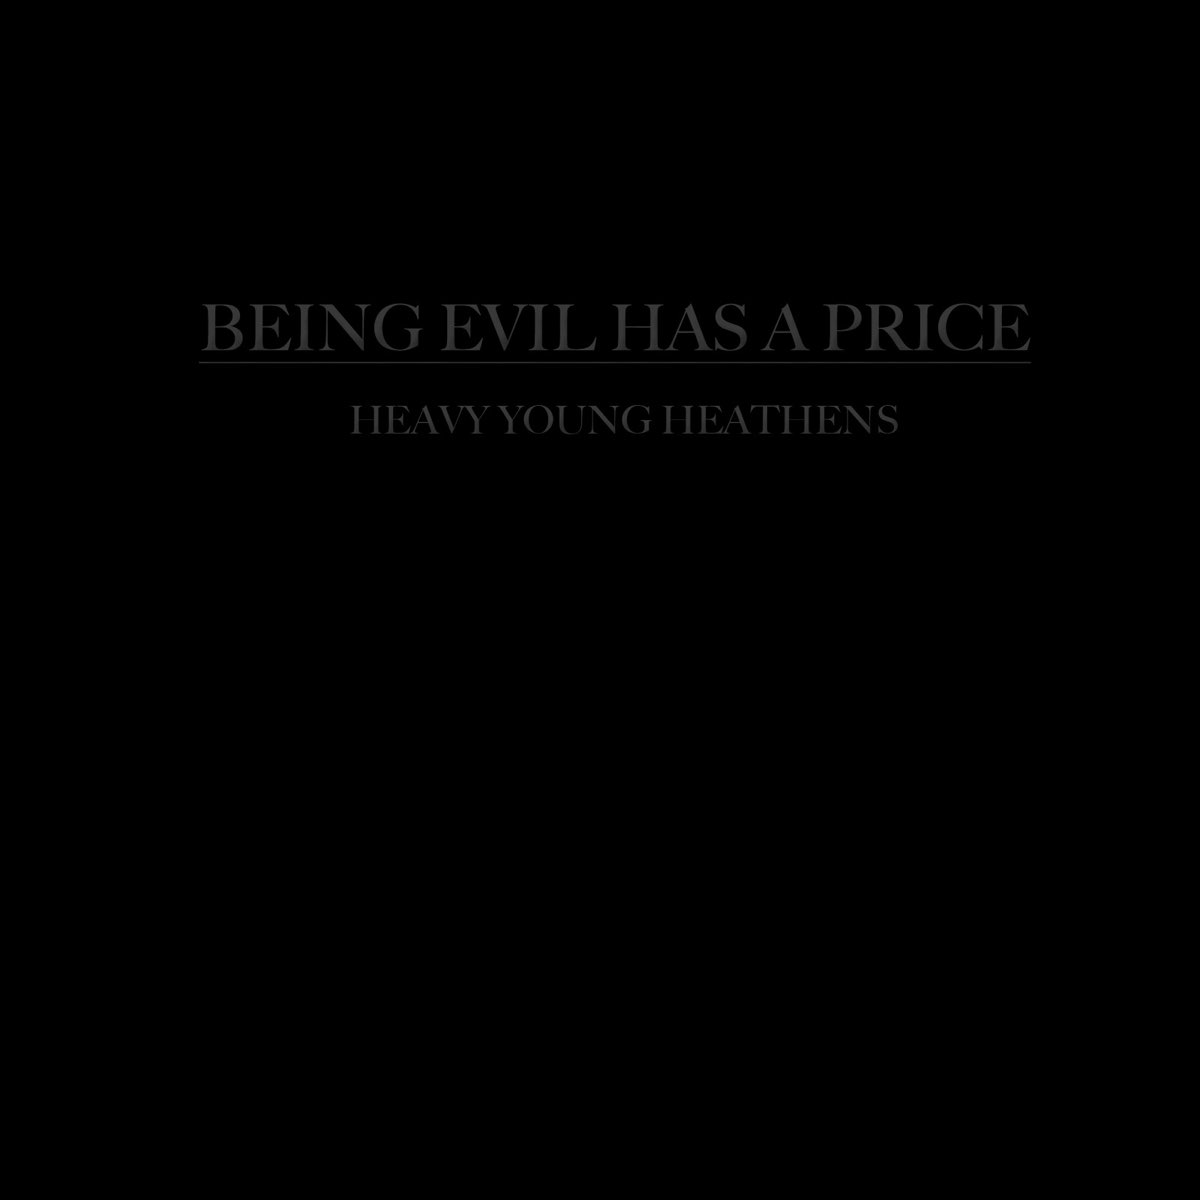 Being Evil Has a Price - Single by Heavy Young Heathens on Apple Music